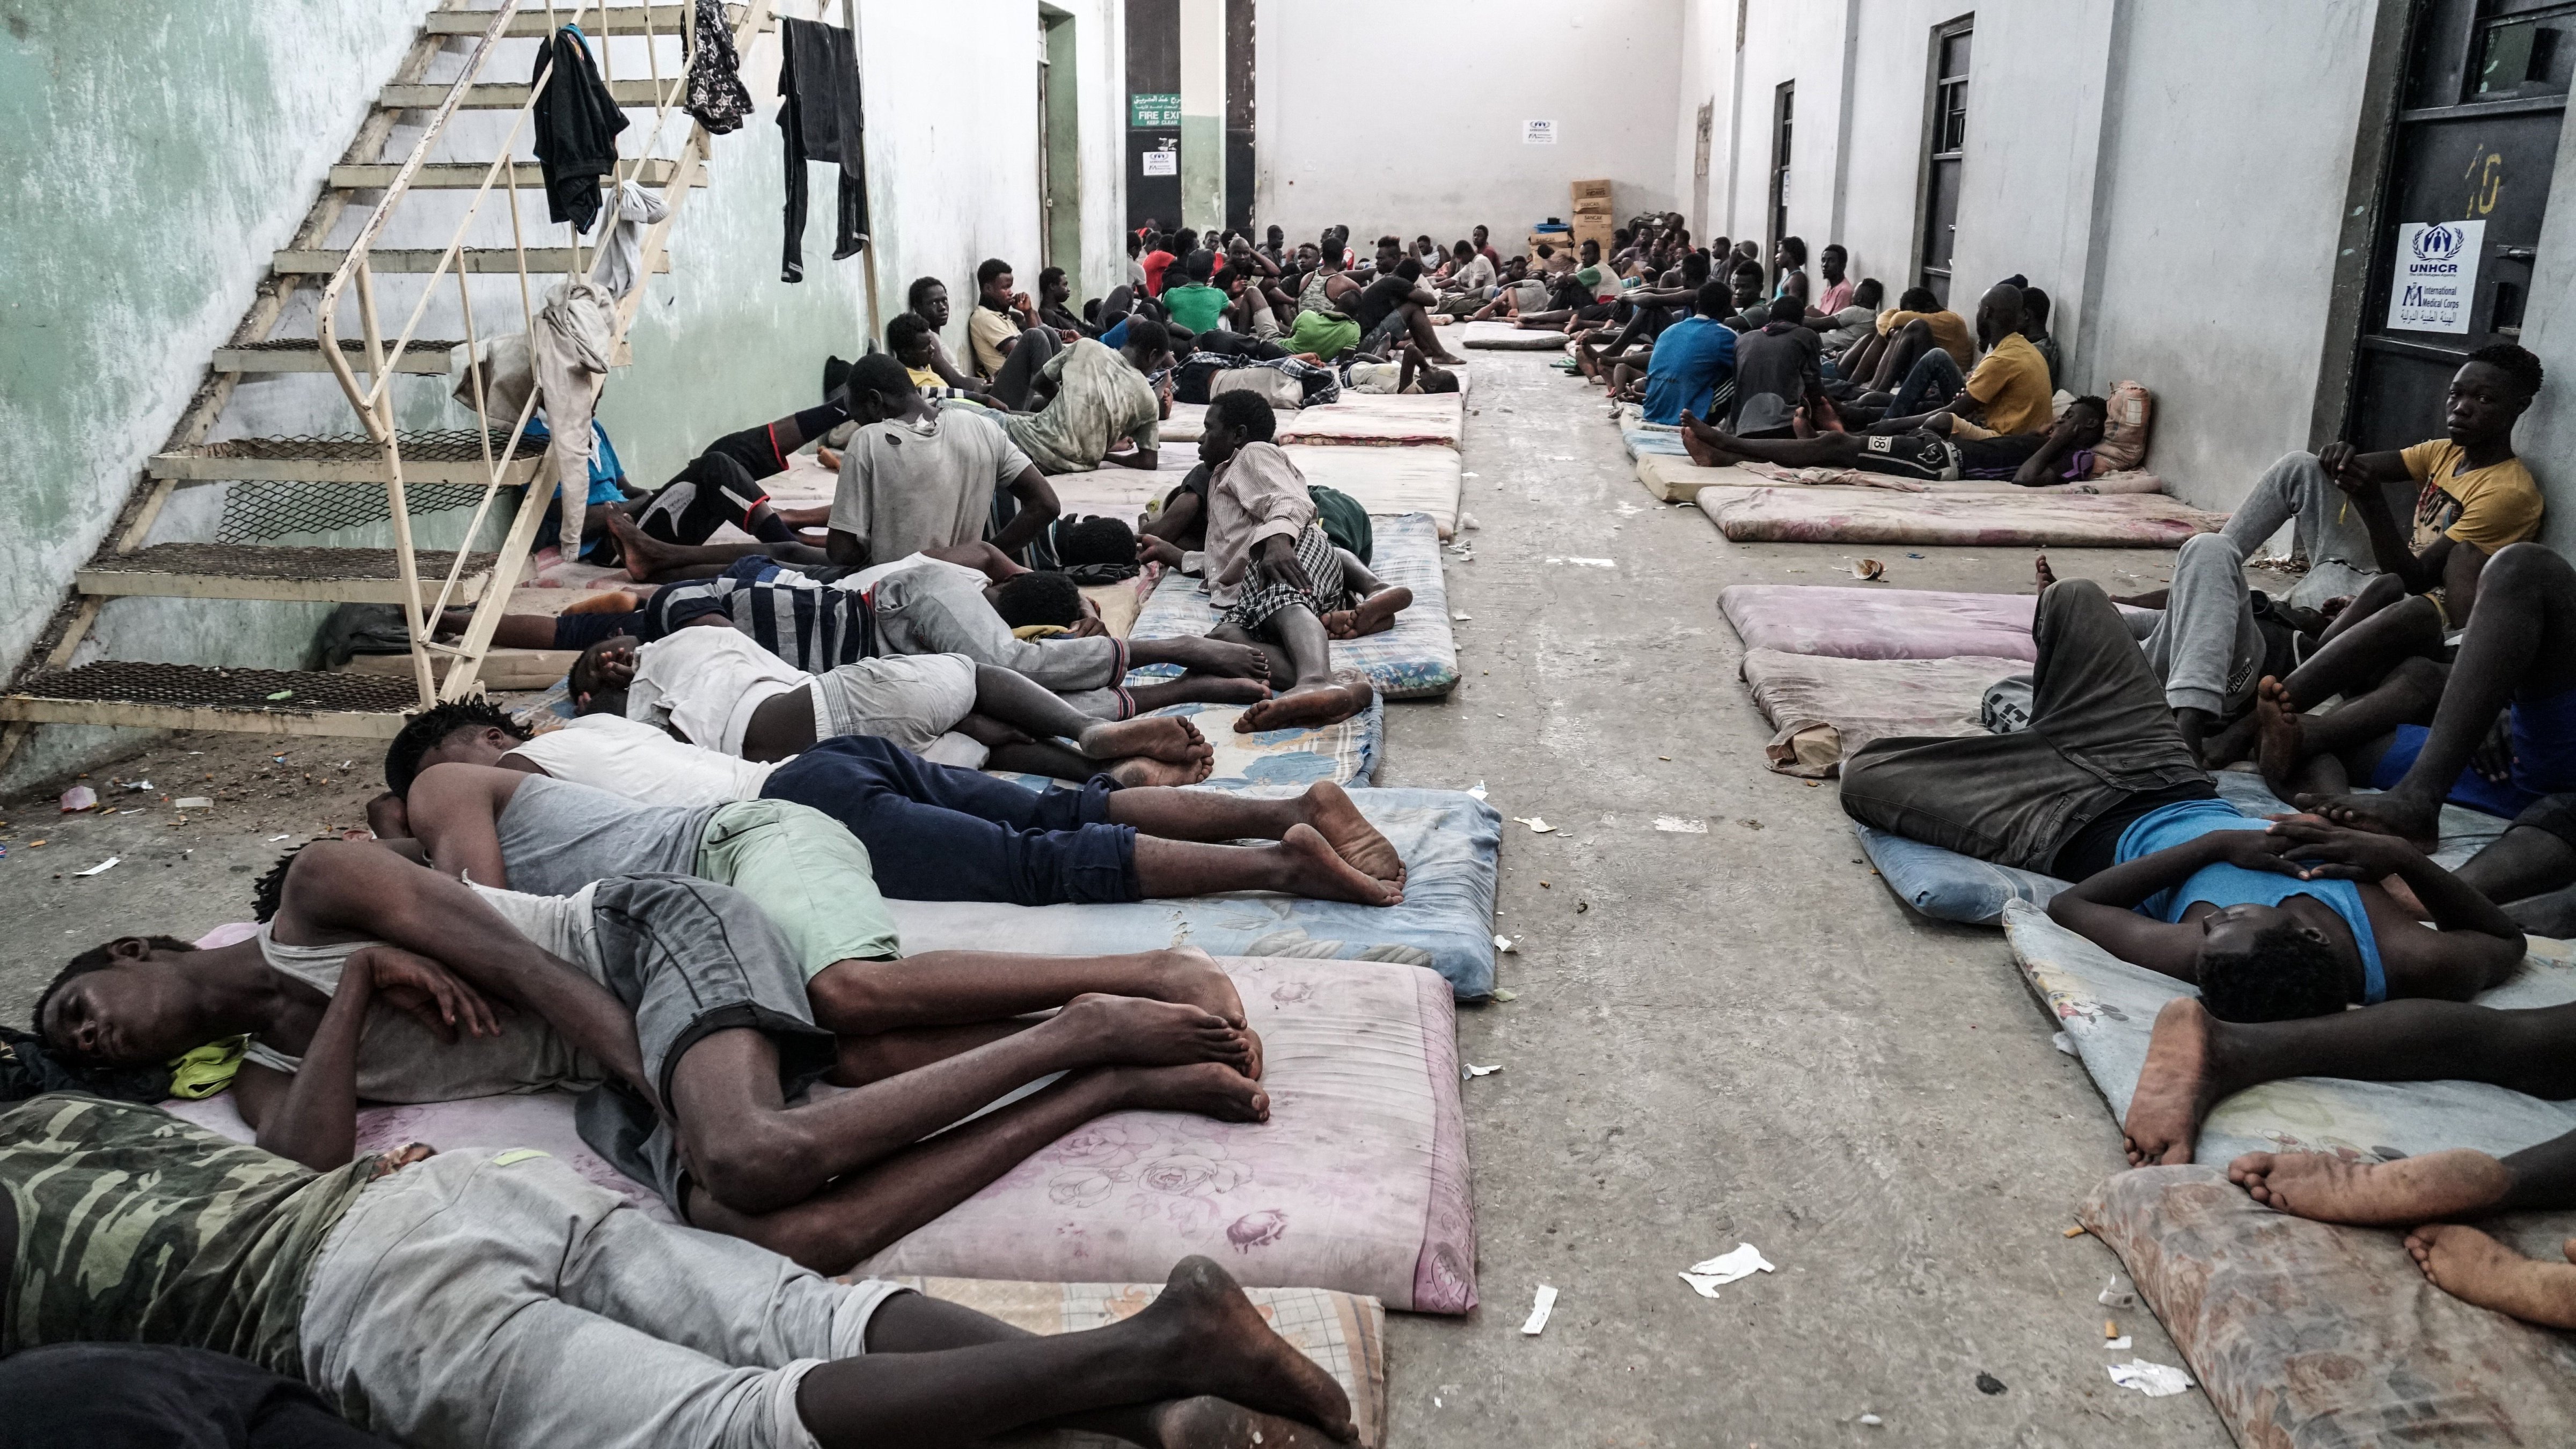 Illegal immigrants are seen at a detention centre in Zawiyah, 45 kilometres west of the Libyan capital Tripoli, on June 17, 2017. (Taha Jawashi—AFP/Getty Images)